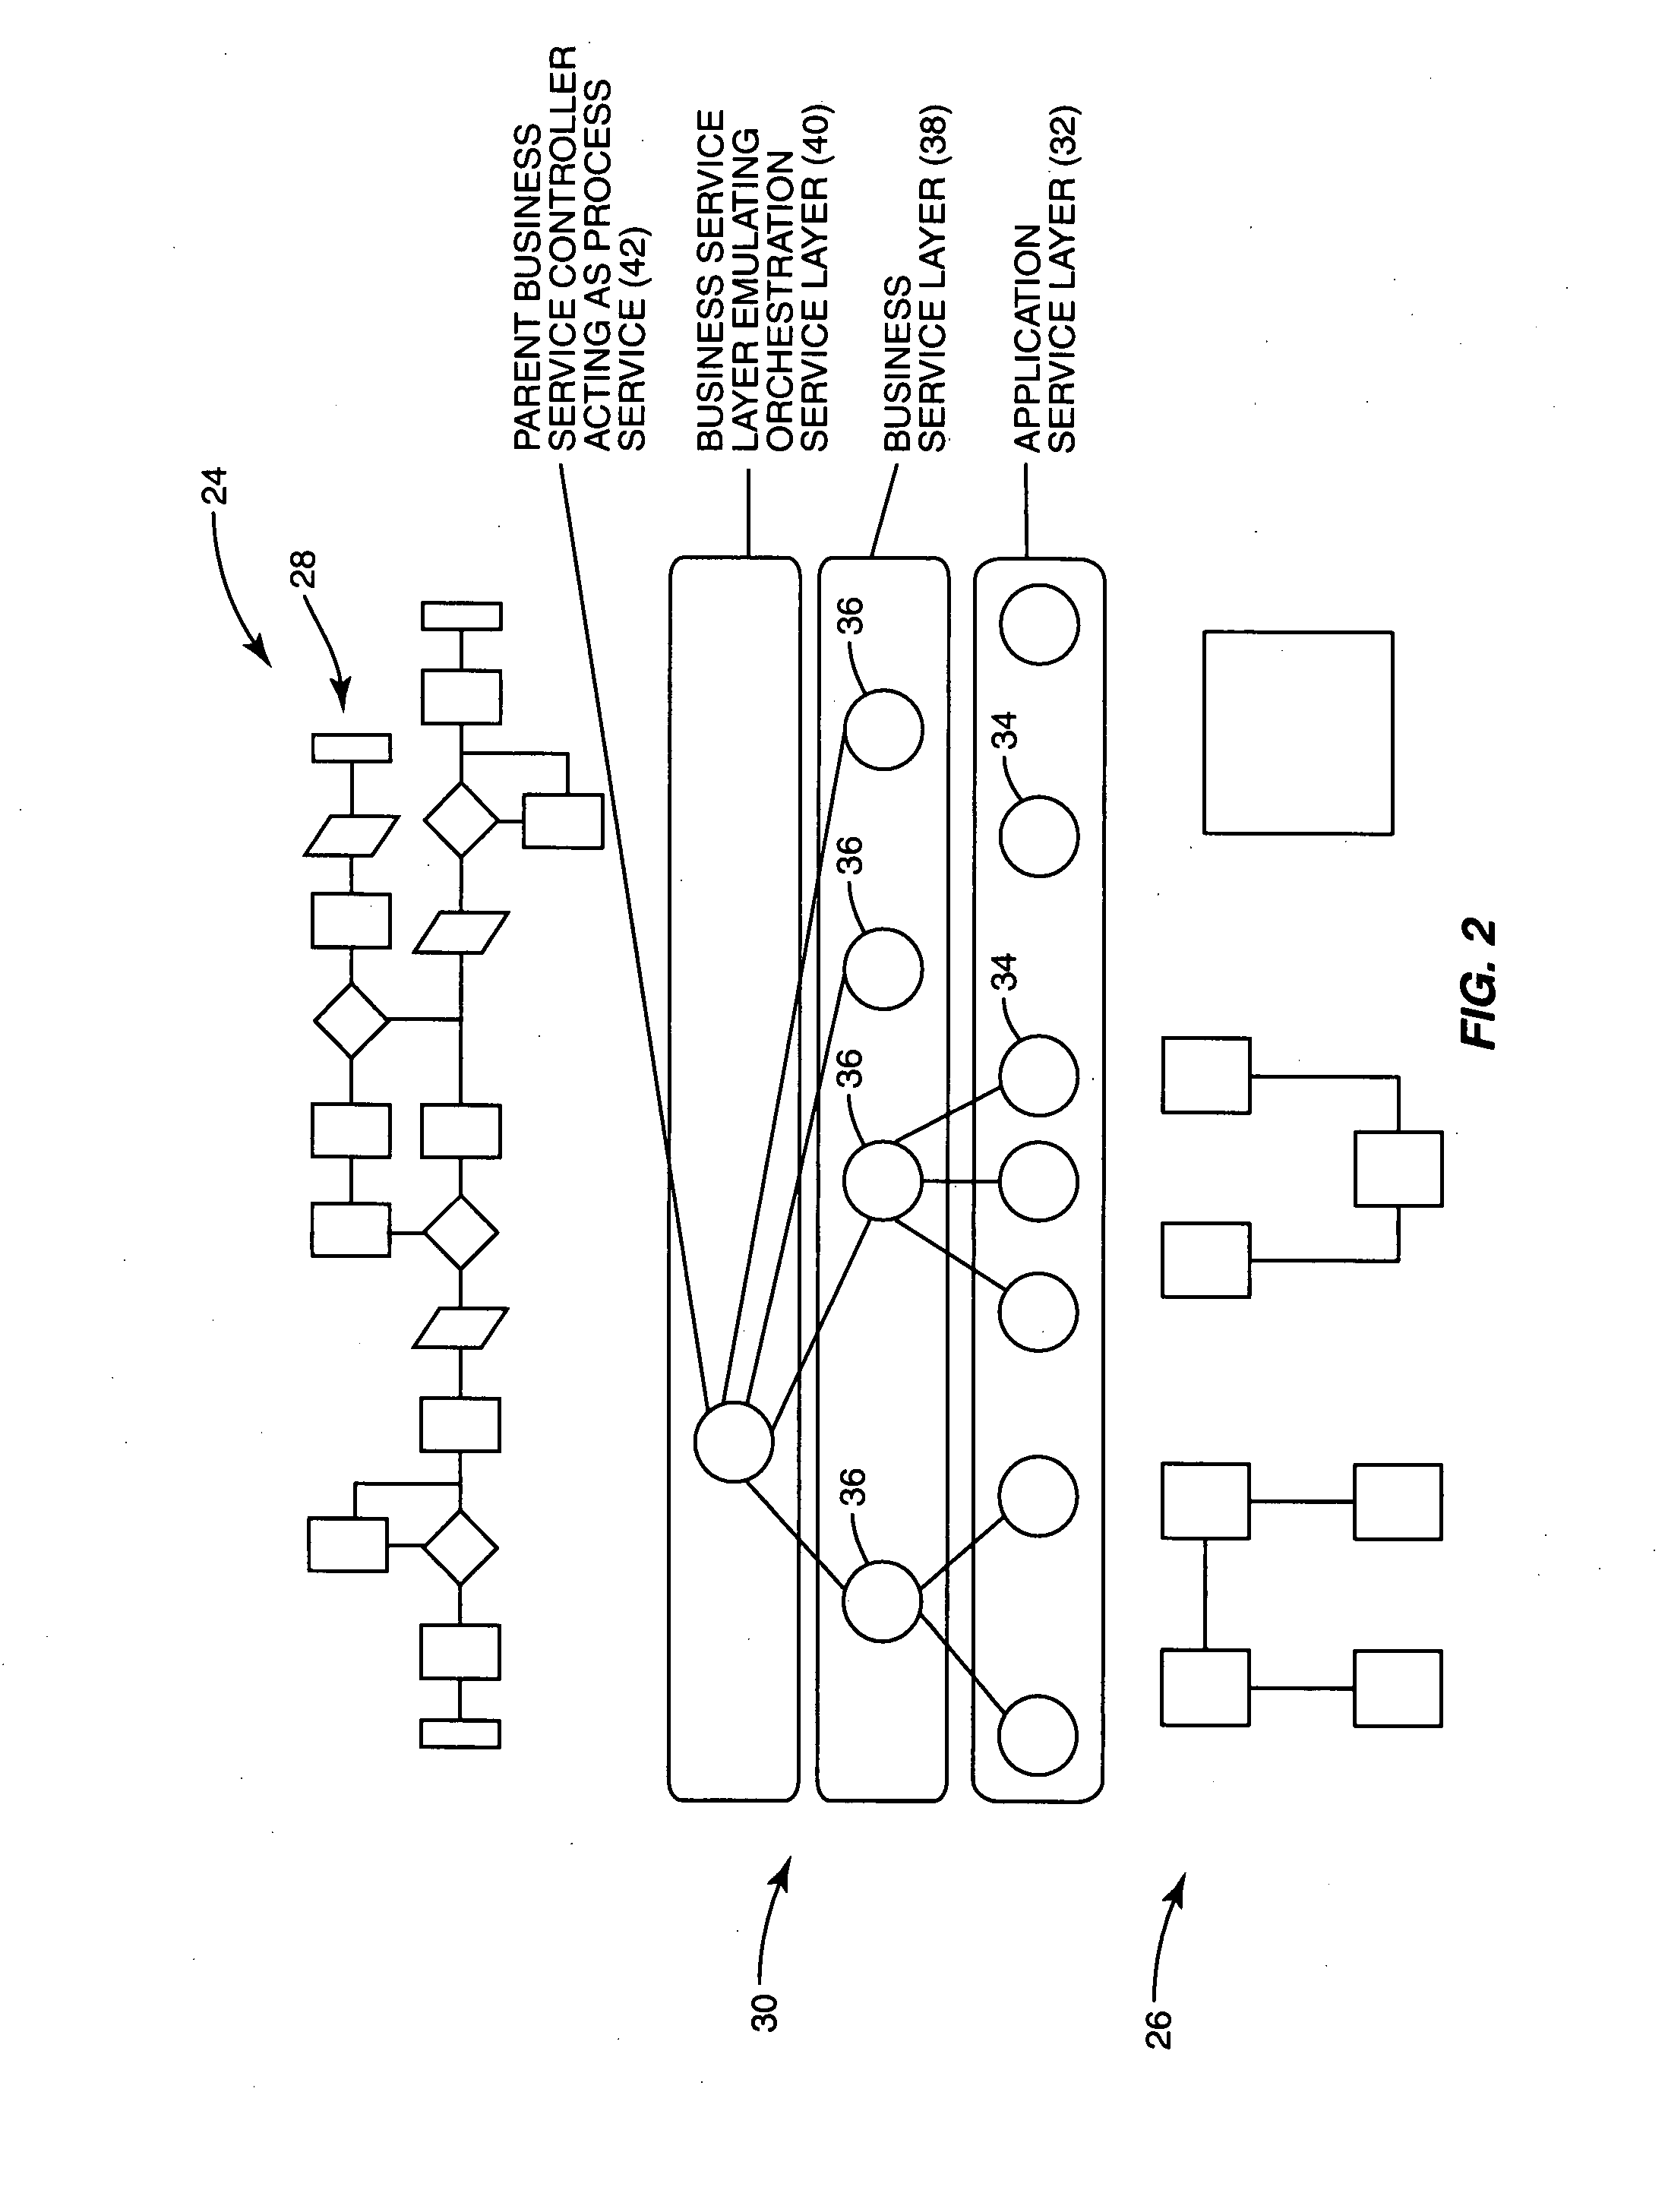 Display and management of a service composition candidate inventory